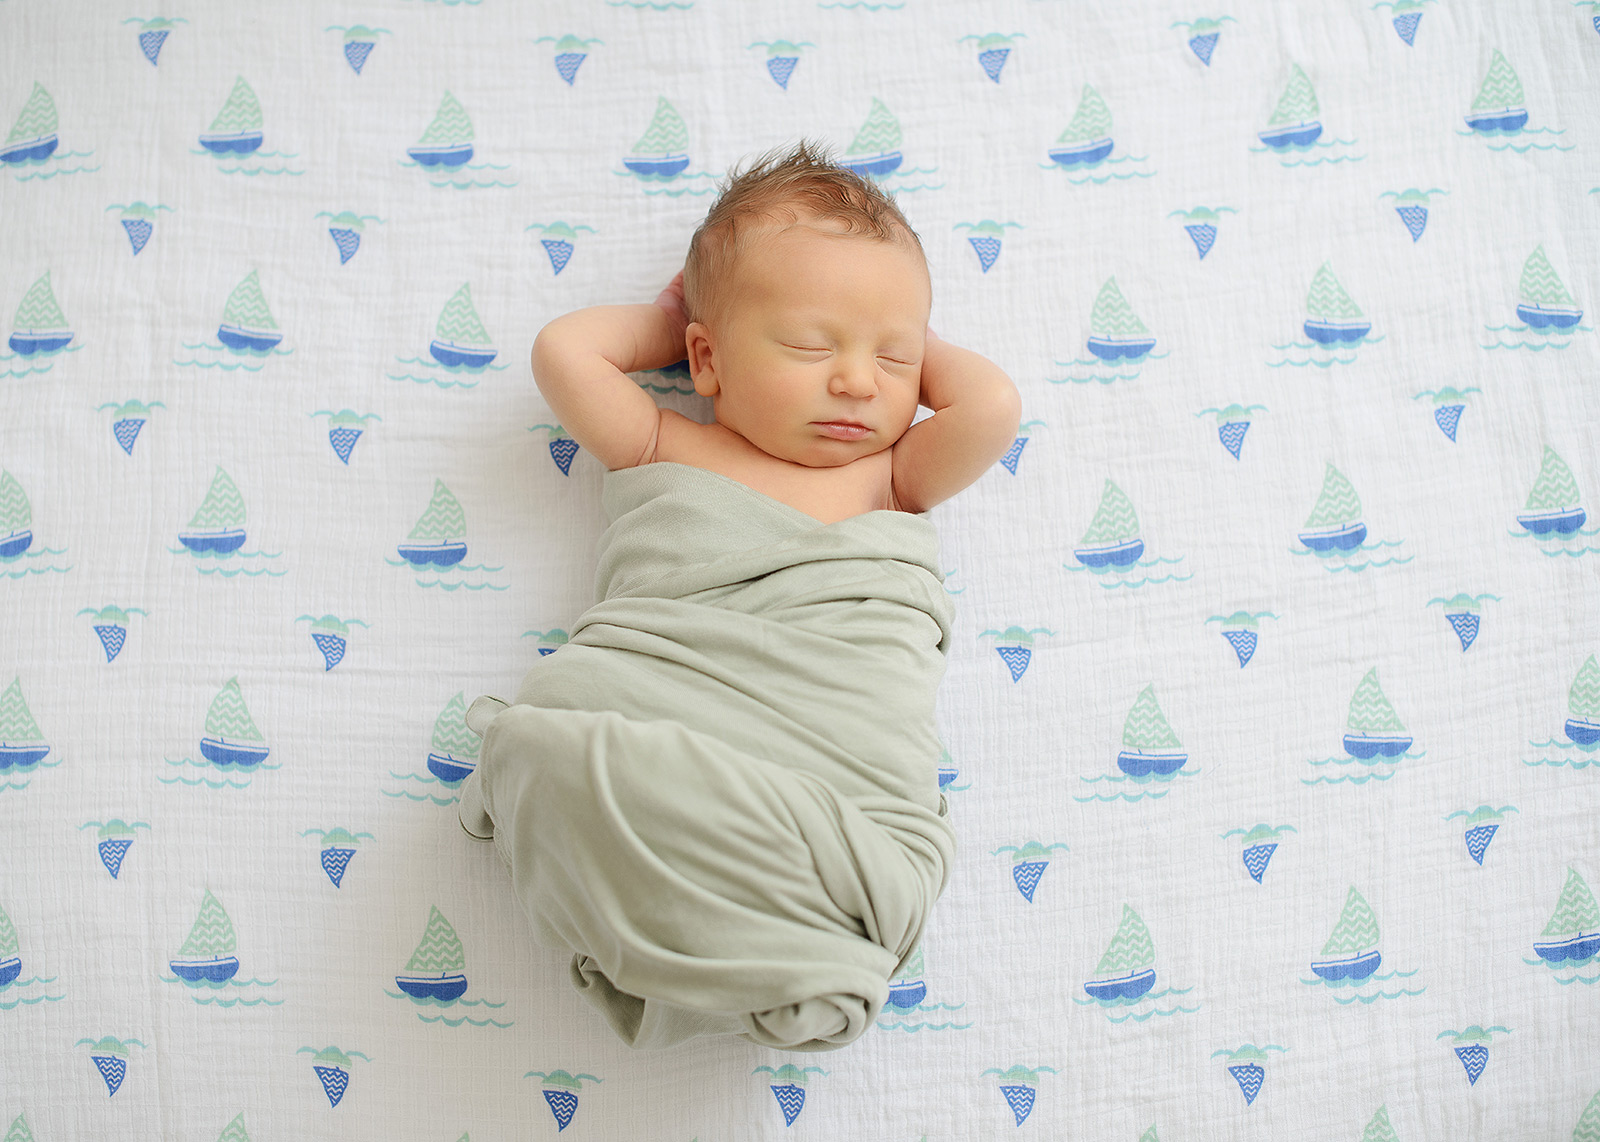 Newborn baby boy chilling with arms up on sailboat pattern sheet